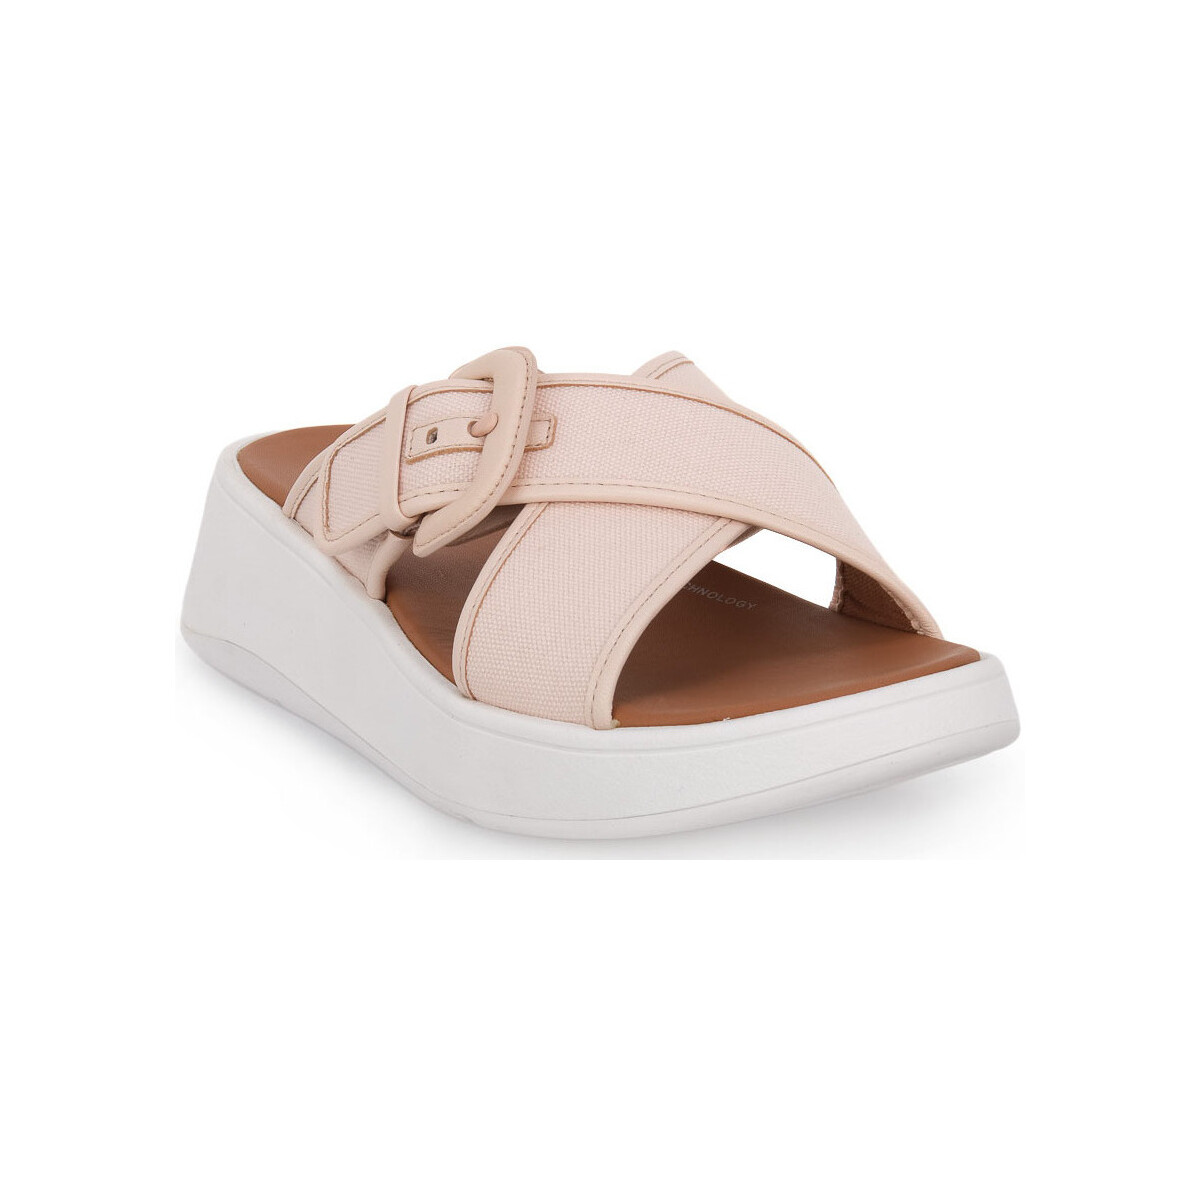 Sapatos Mulher Chinelos FitFlop F MODE BUCKLE CANVAS PLATFORM Rosa